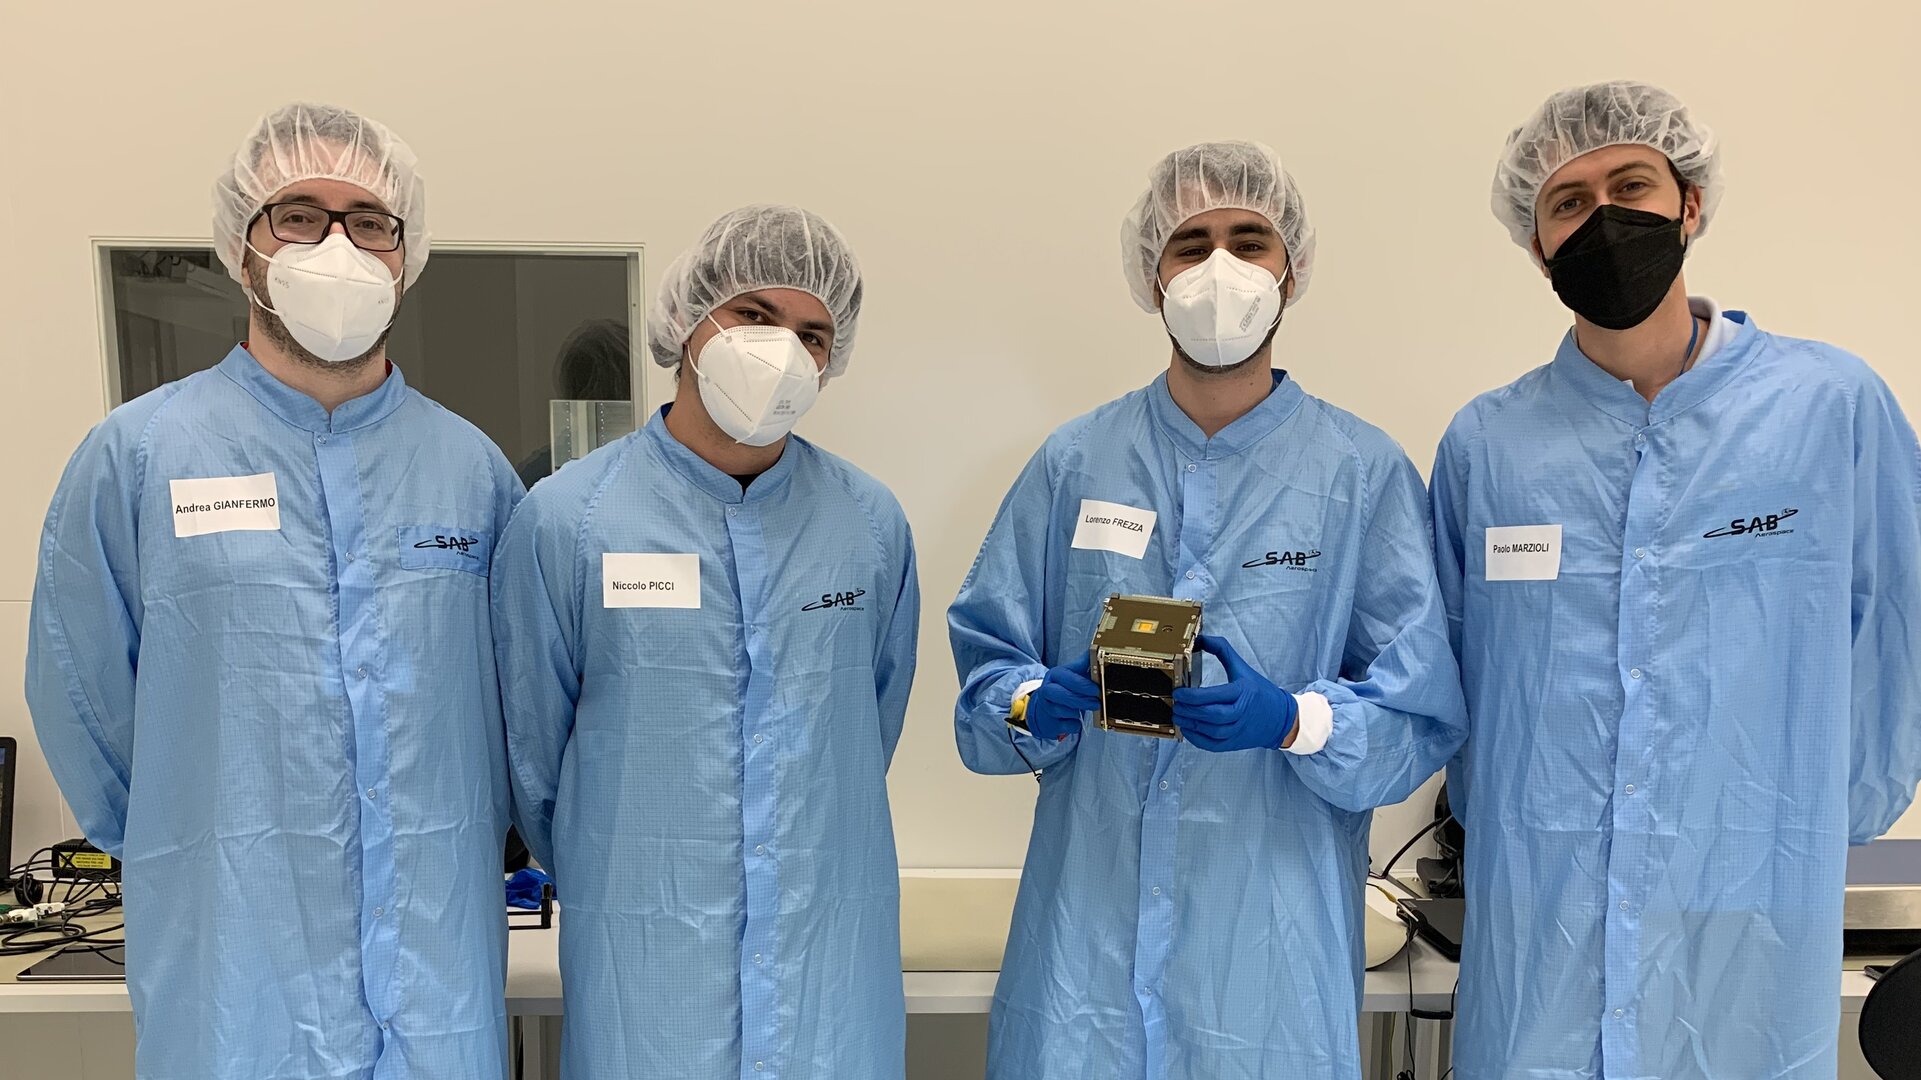 Members of the LEDSAT team in the cleanroom, ready to integrate!